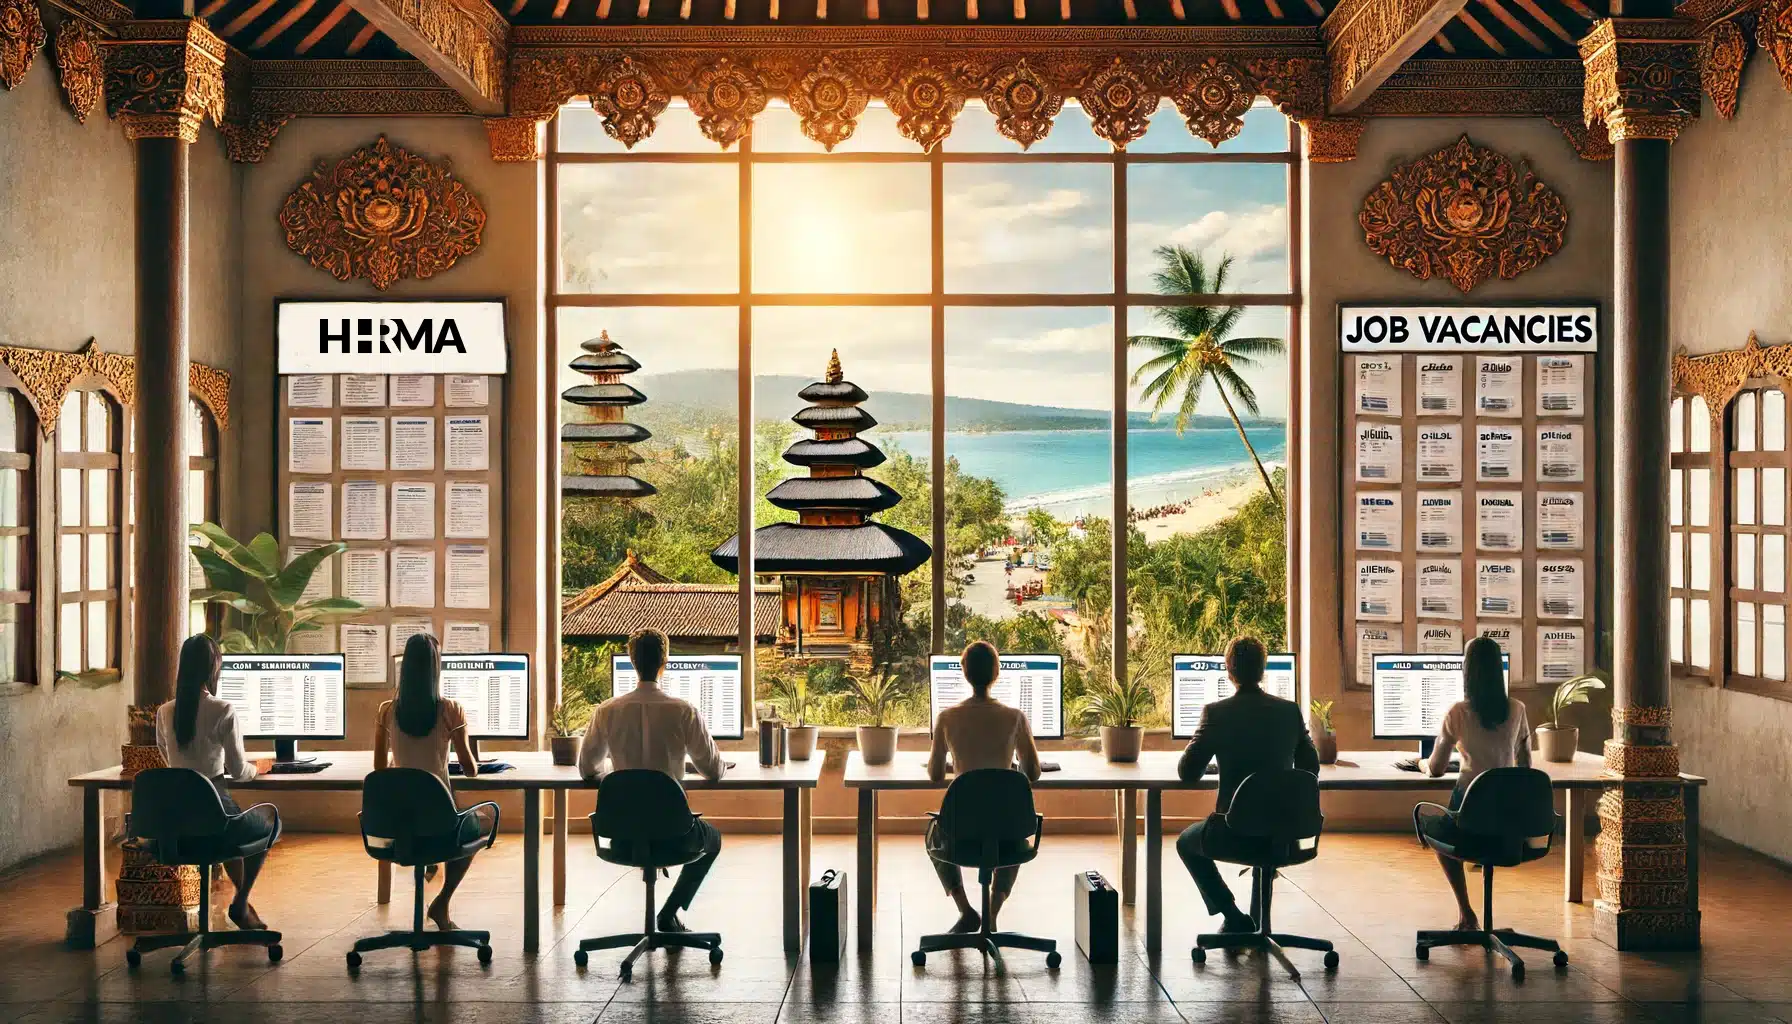 HHRMA Bali office with traditional Balinese architecture, modern workstations, and a scenic beach view.